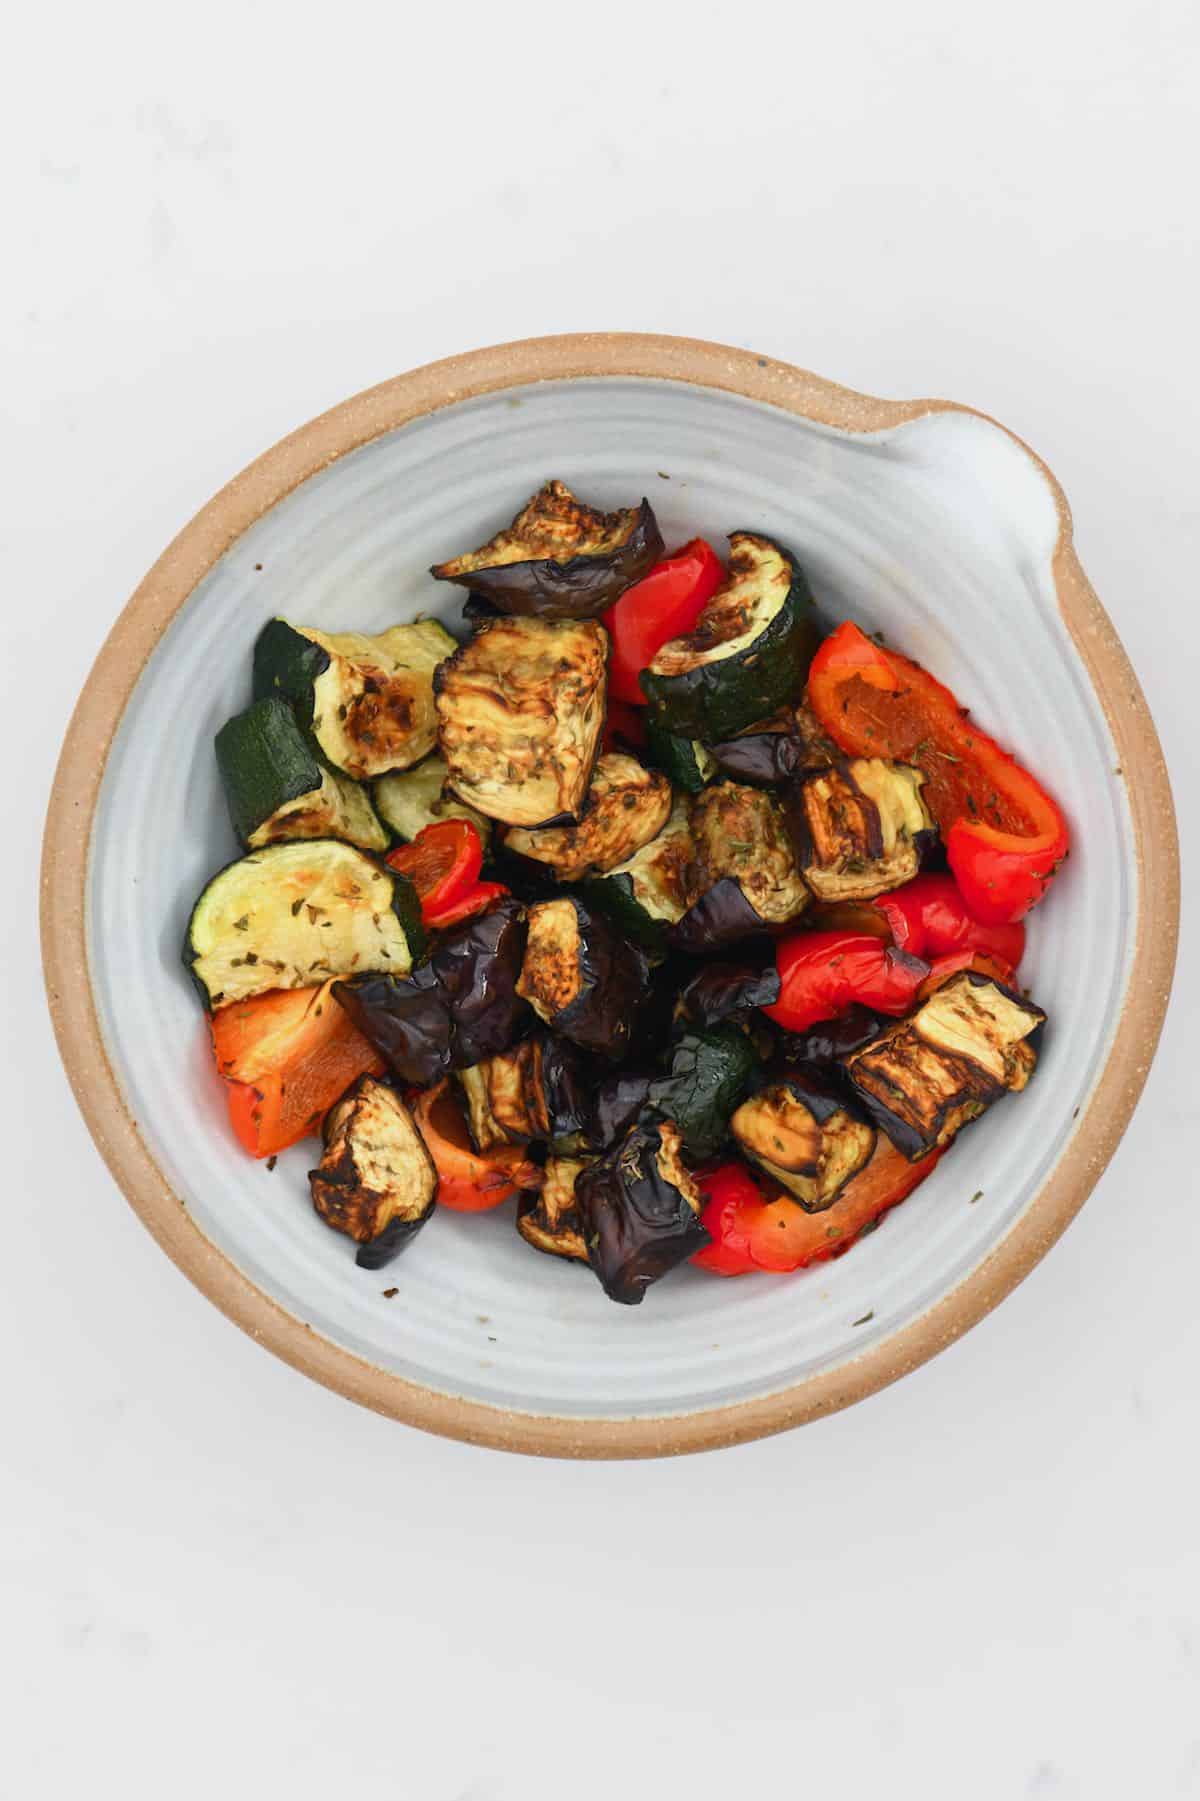 A bowl with roasted veggies